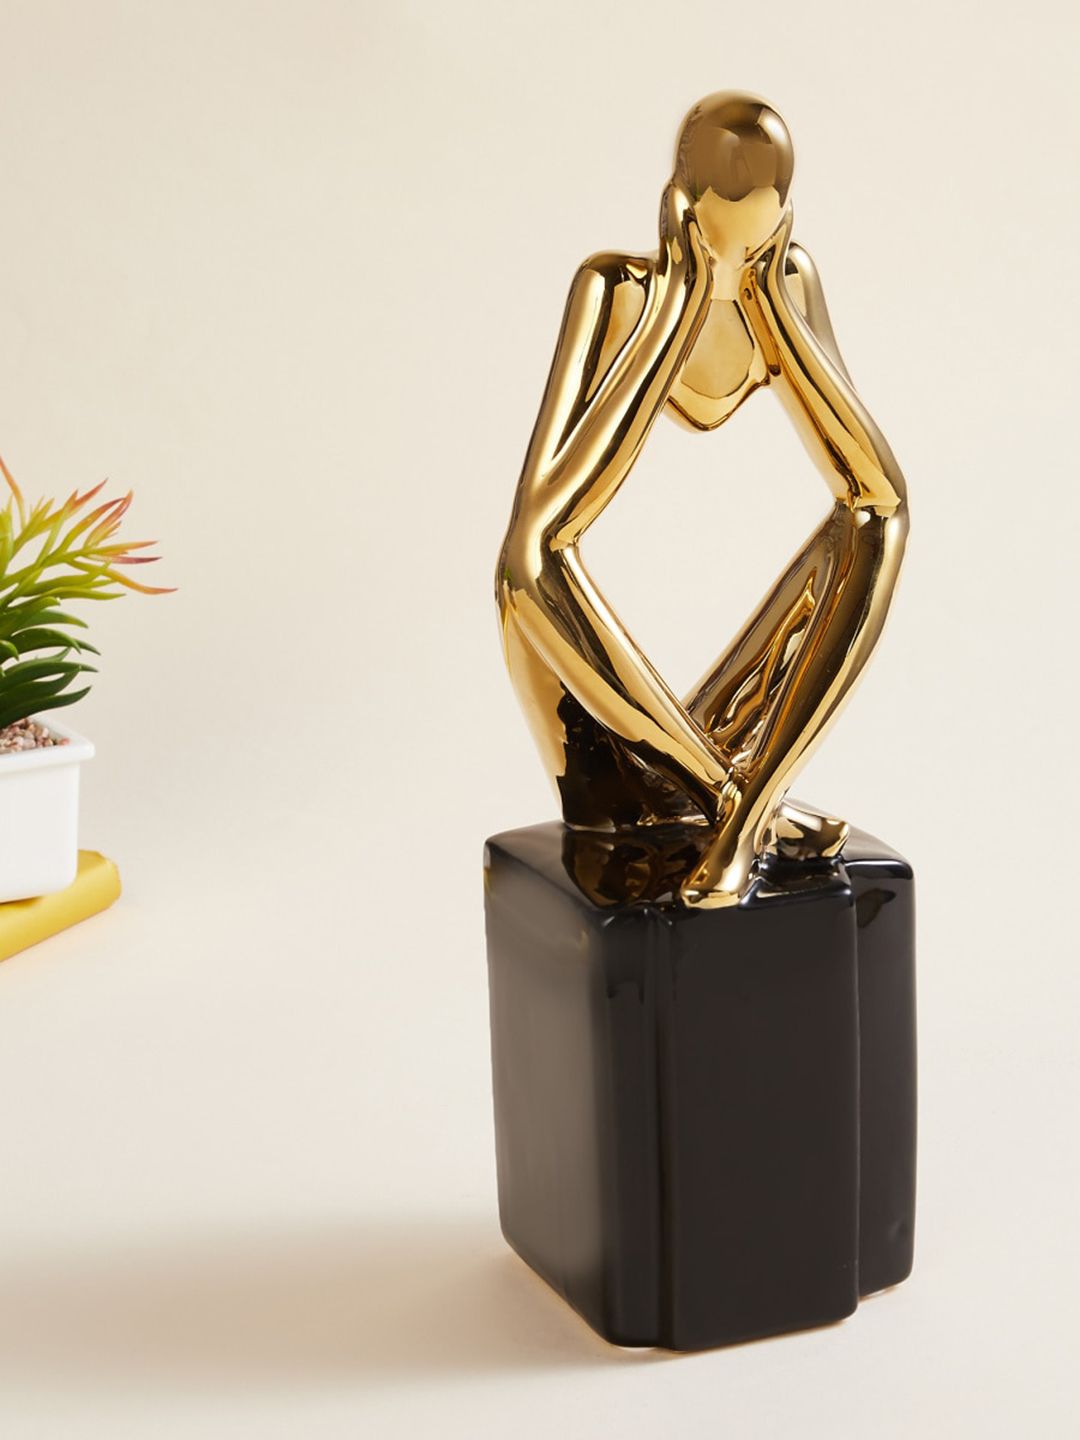 Home Centre Gold-Toned & Black Solid Sitting On Block Ceramic Figurine Showpieces Price in India